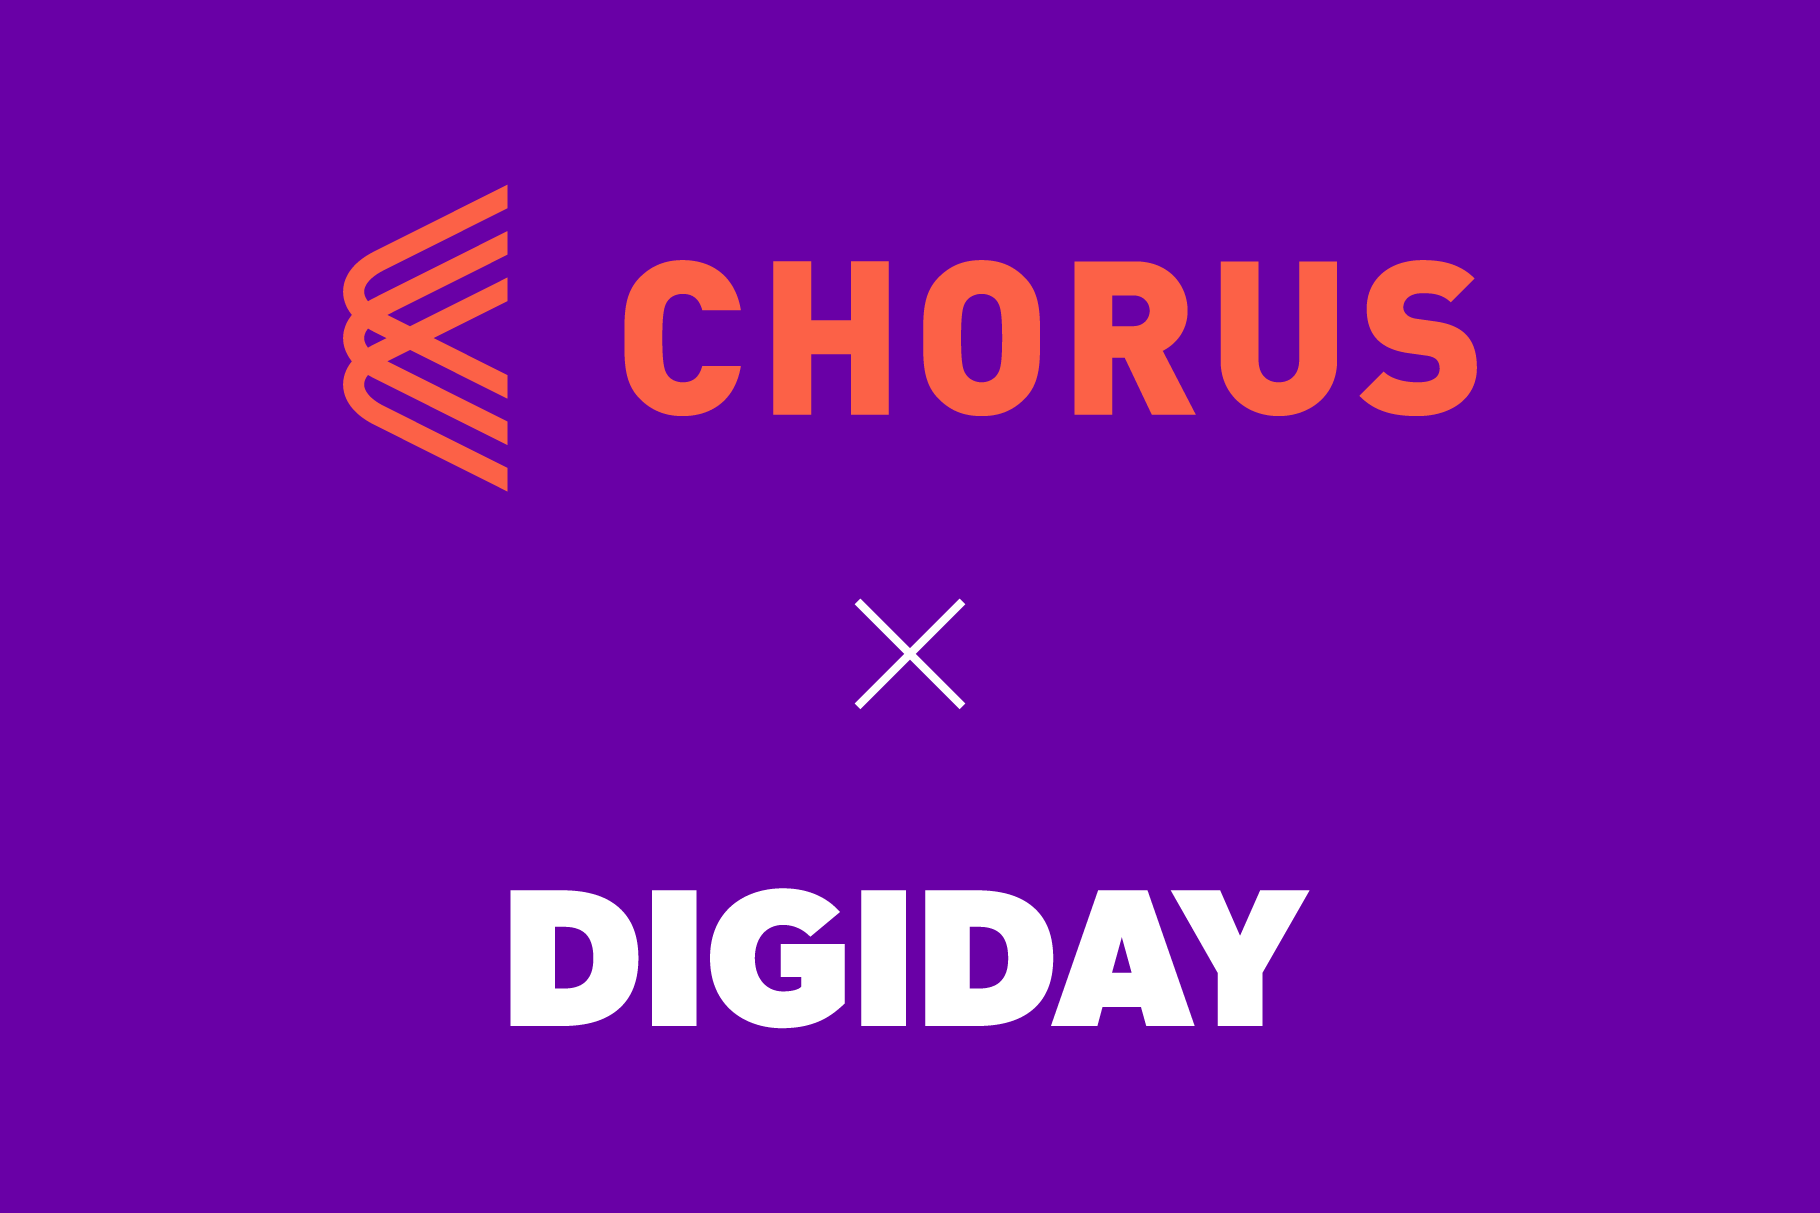 Text-only graphic showing the Chorus logo in orange, the Digiday logo in white, separated by a multiplication symbol. Logos are placed on a purple background.